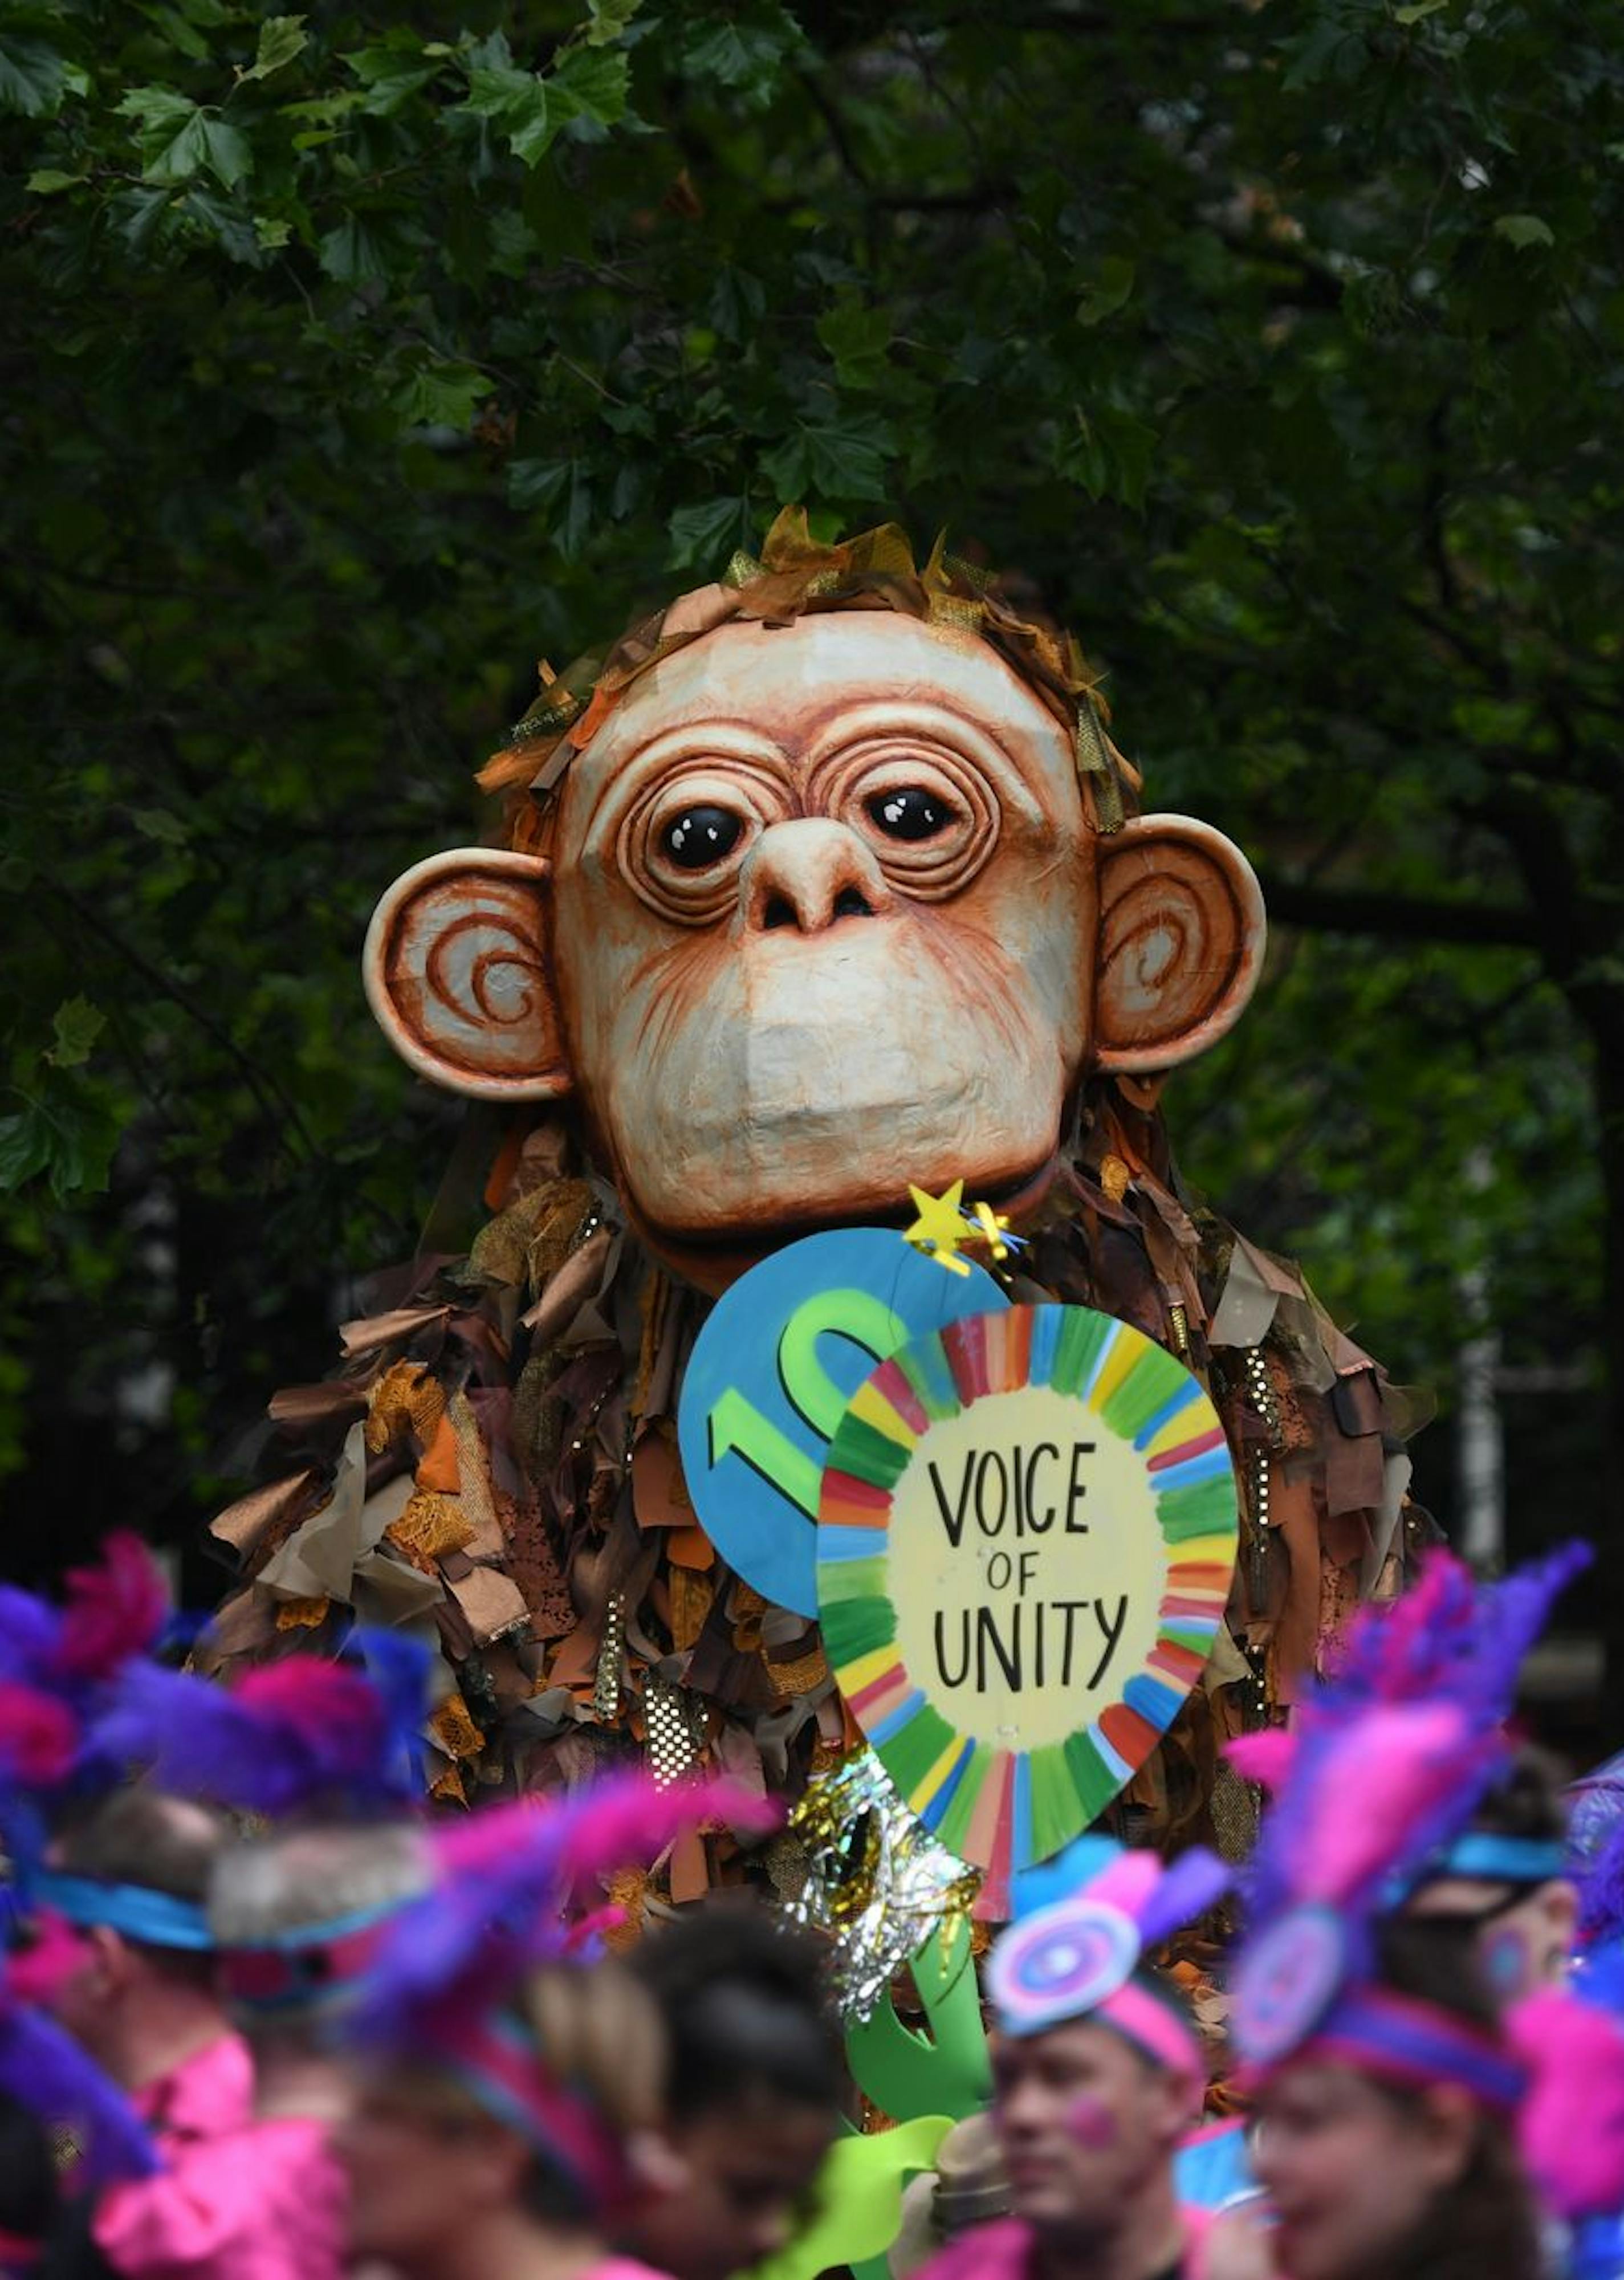 A giant puppet monkey with a paper mache face and a calico body in a crowded parade.